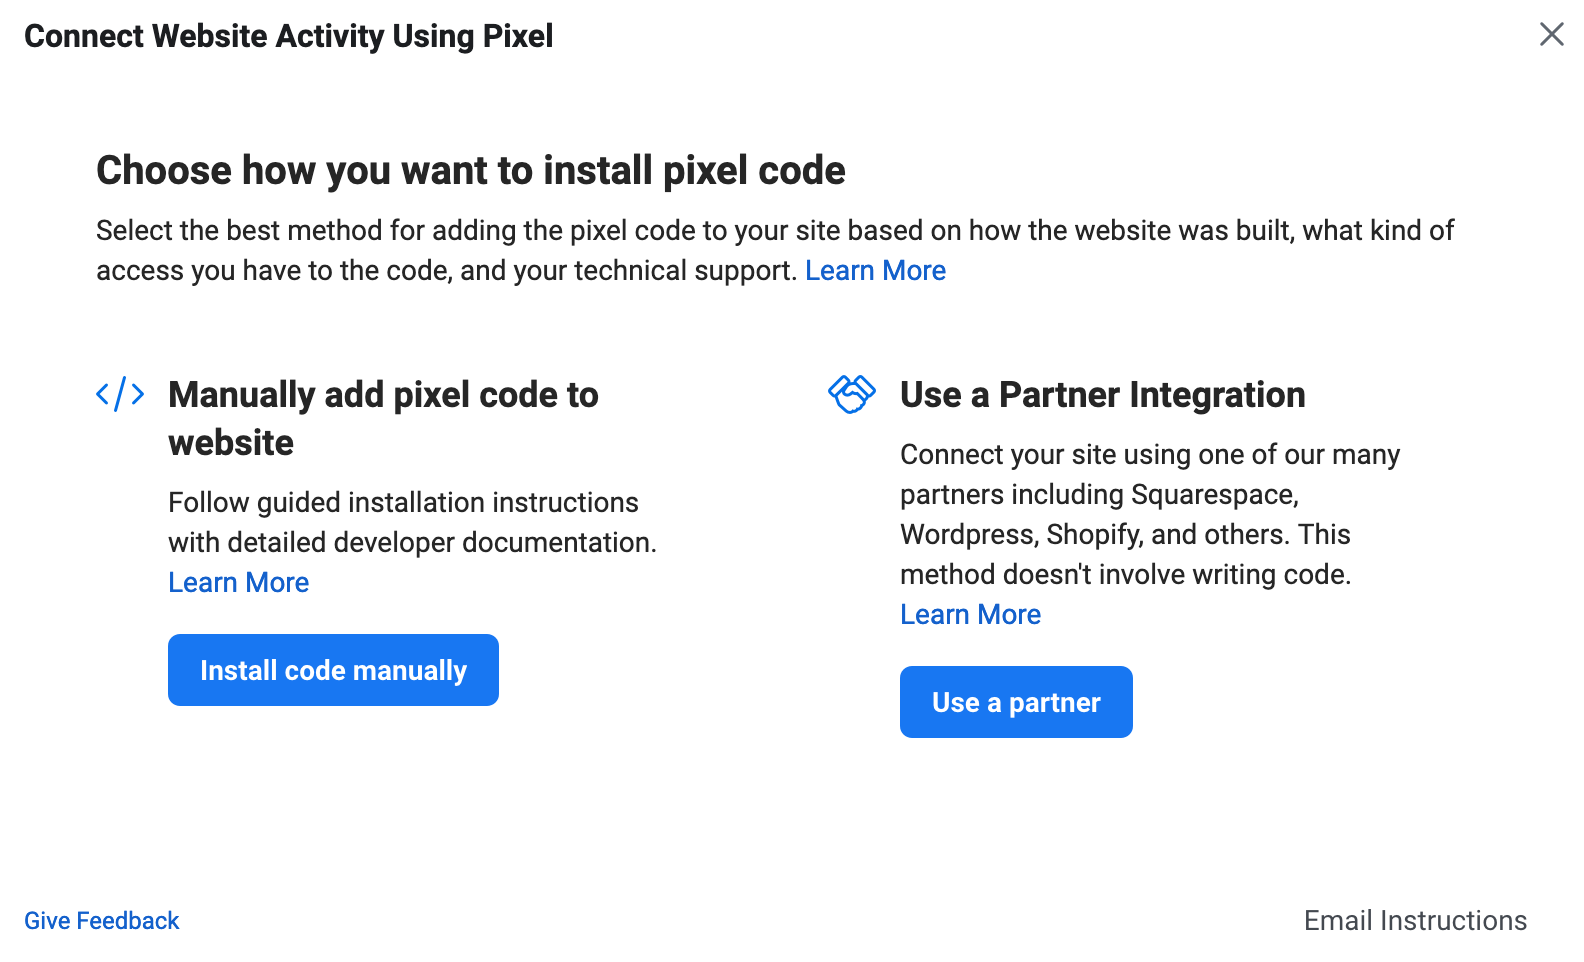 Install Pixel with 2 options.